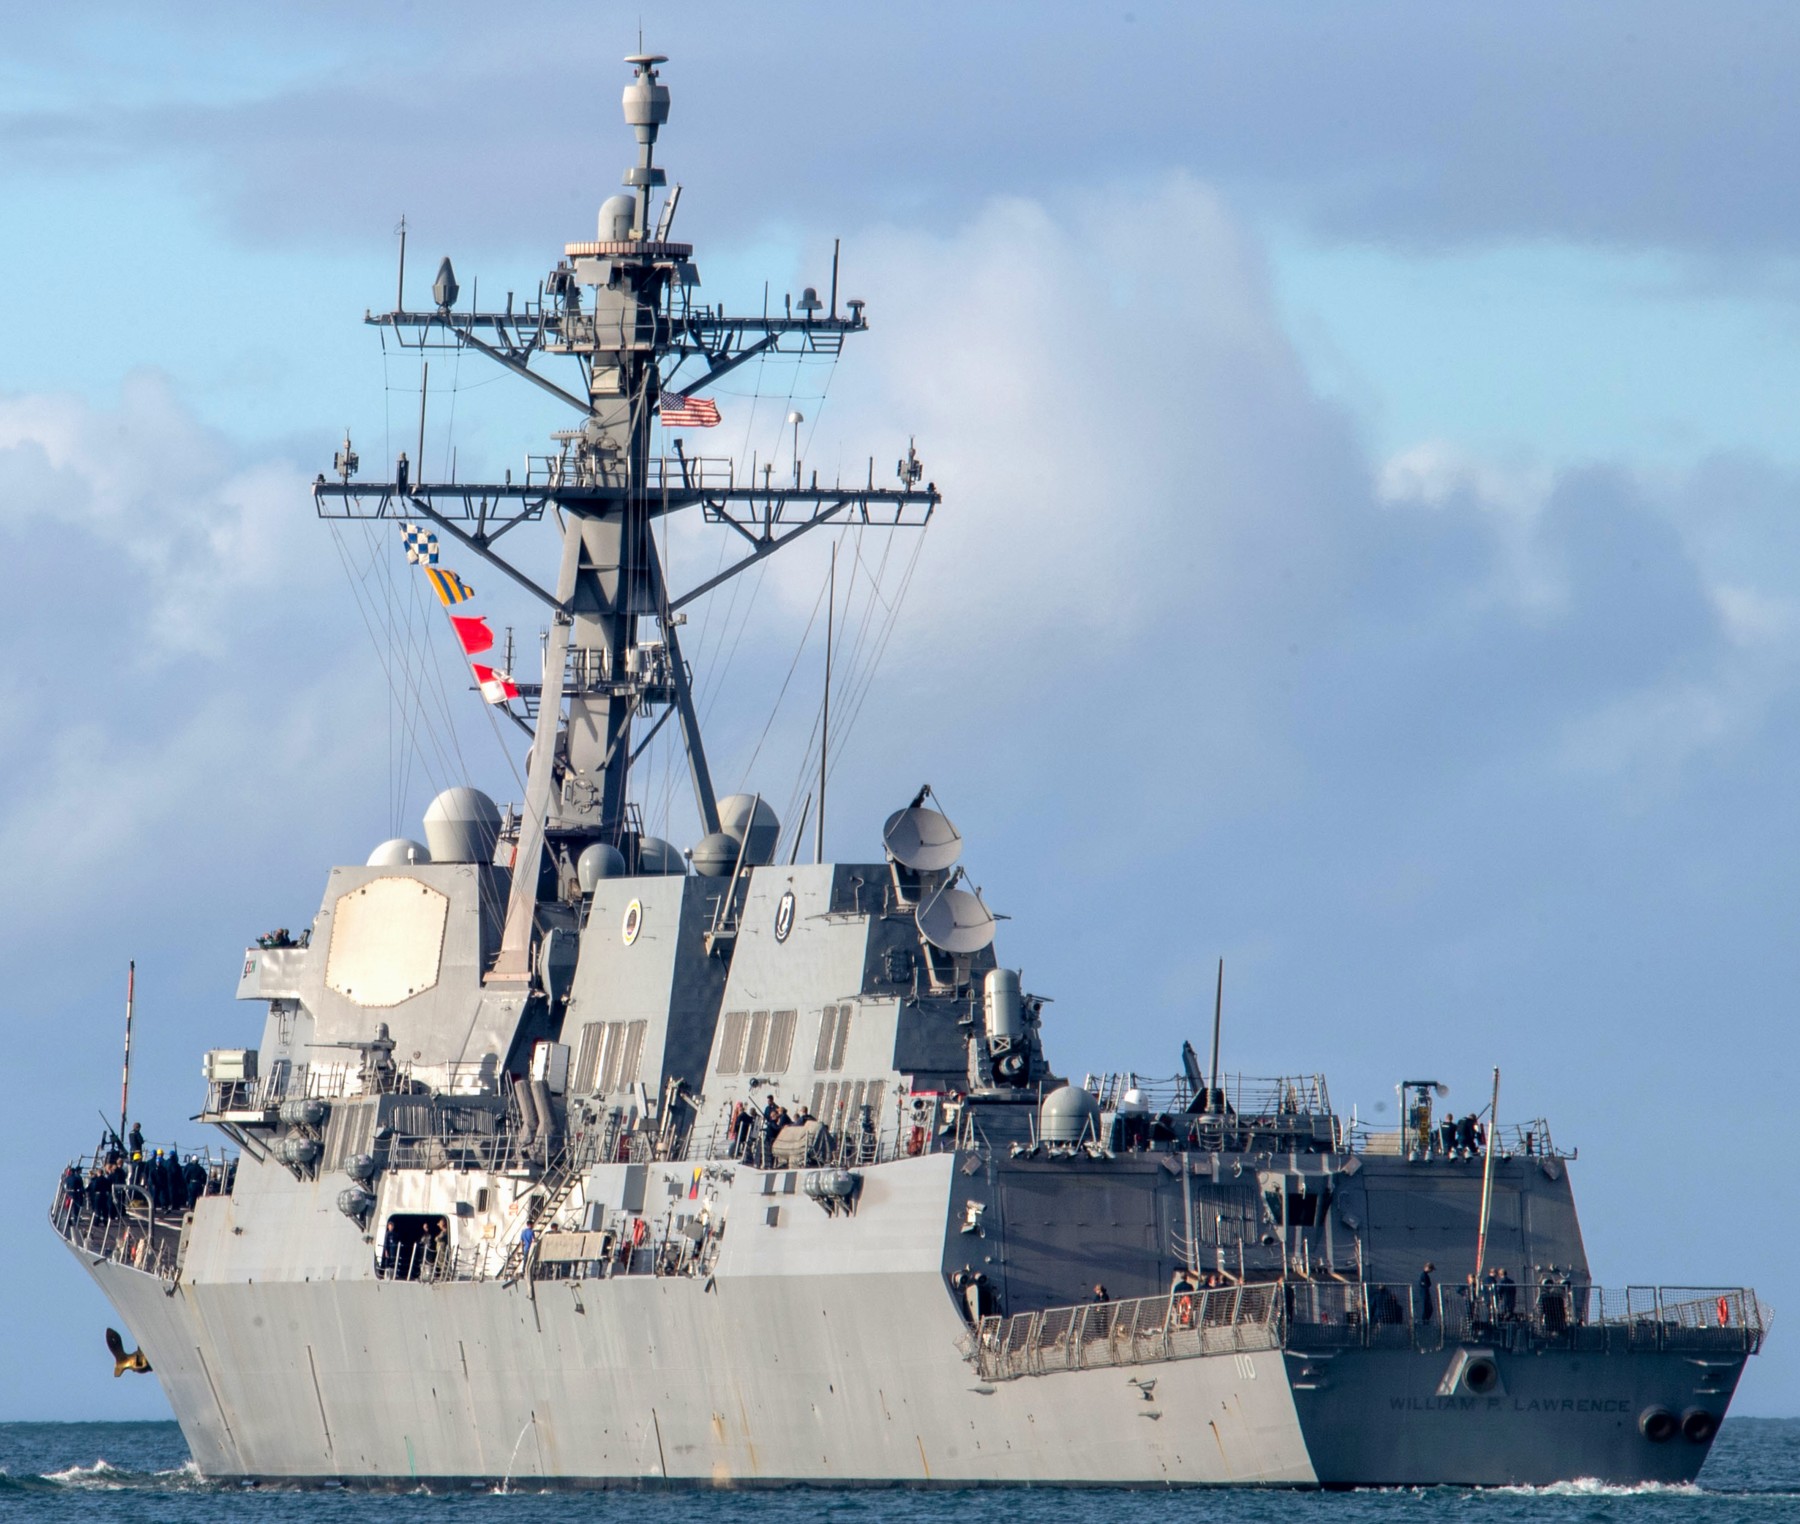 ddg-110 uss william p. lawrence arleigh burke class guided missile destroyer aegis us navy pearl harbor hickam hawaii 82